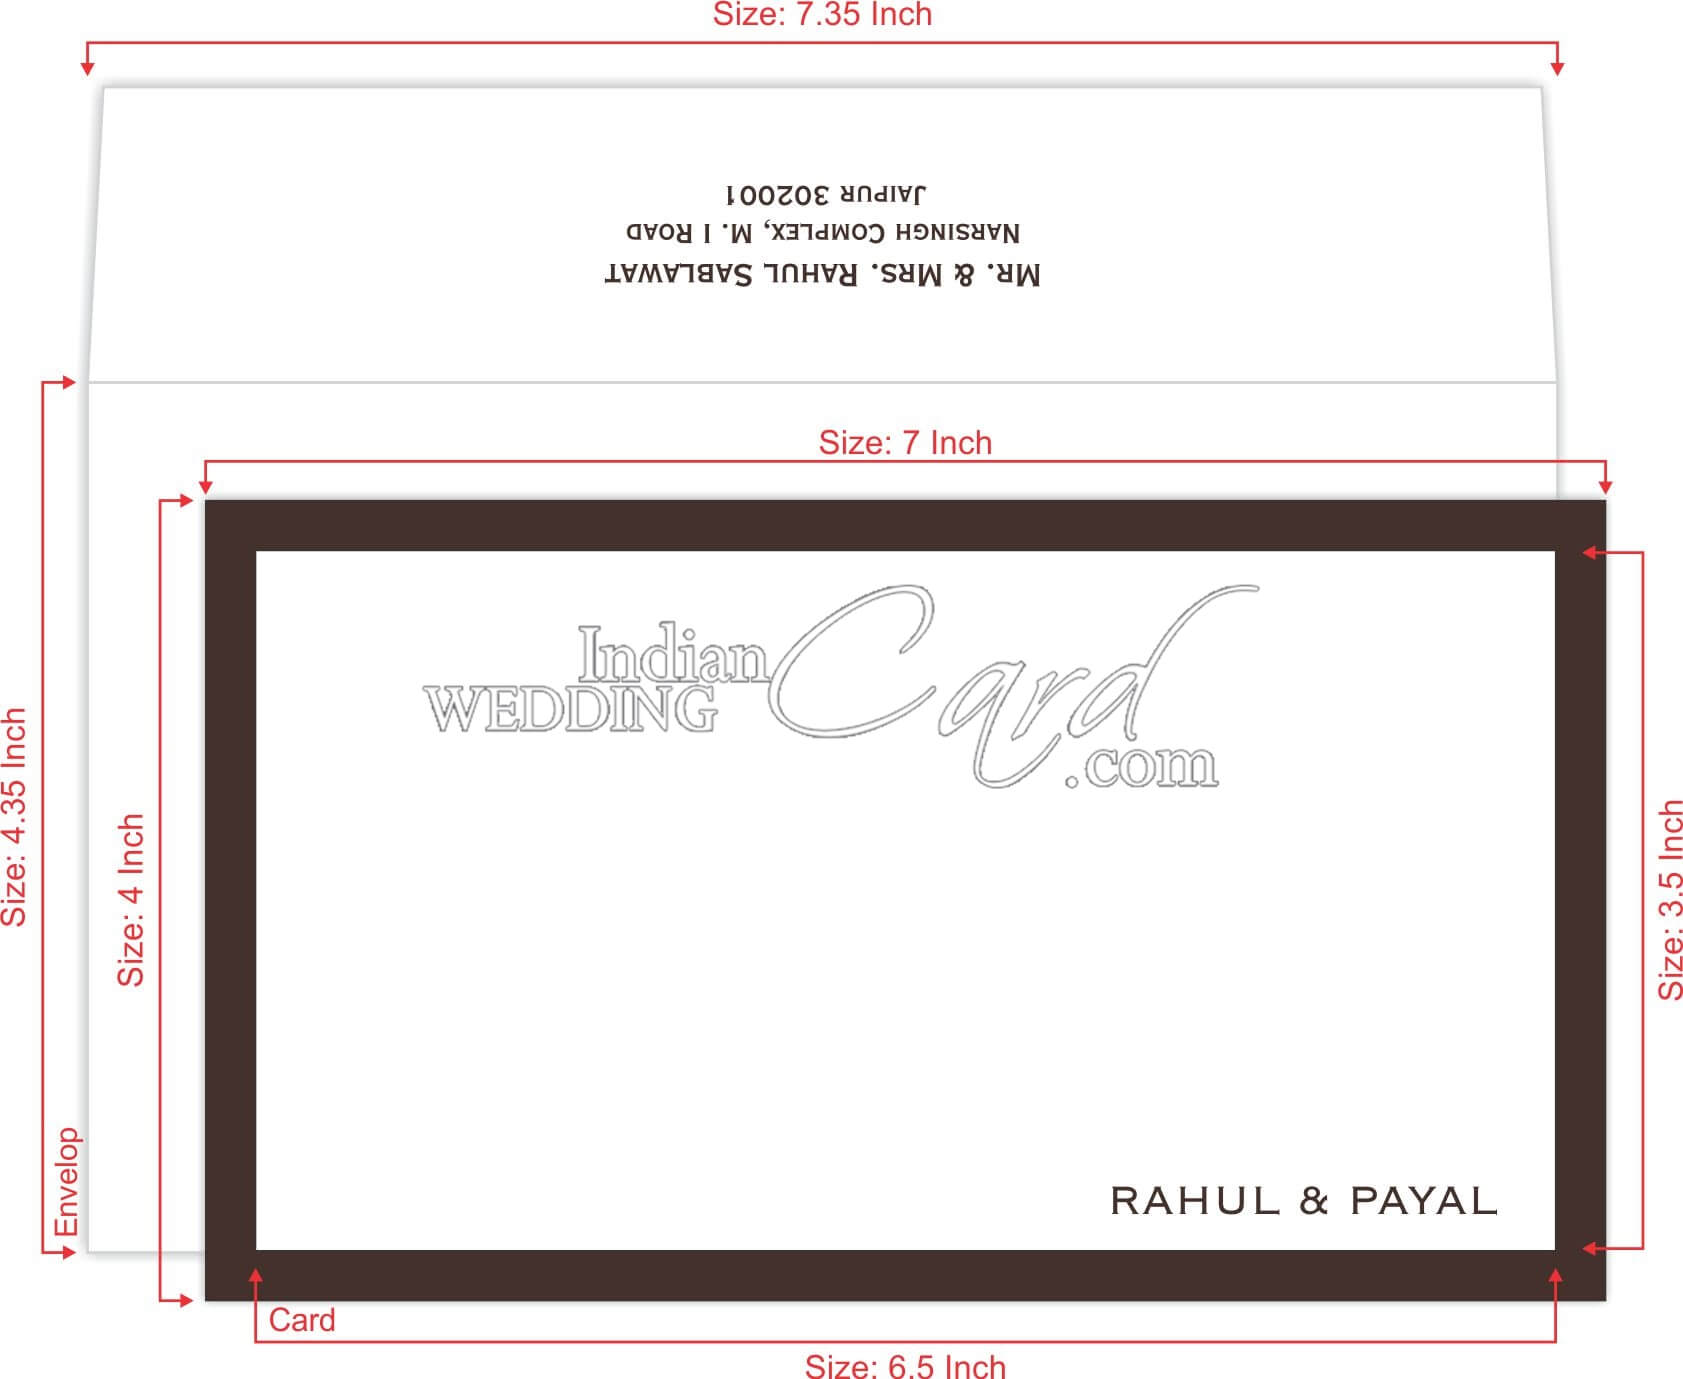 Why Should We Send Wedding Thank You Cards? | Indian Wedding Throughout Wedding Card Size Template